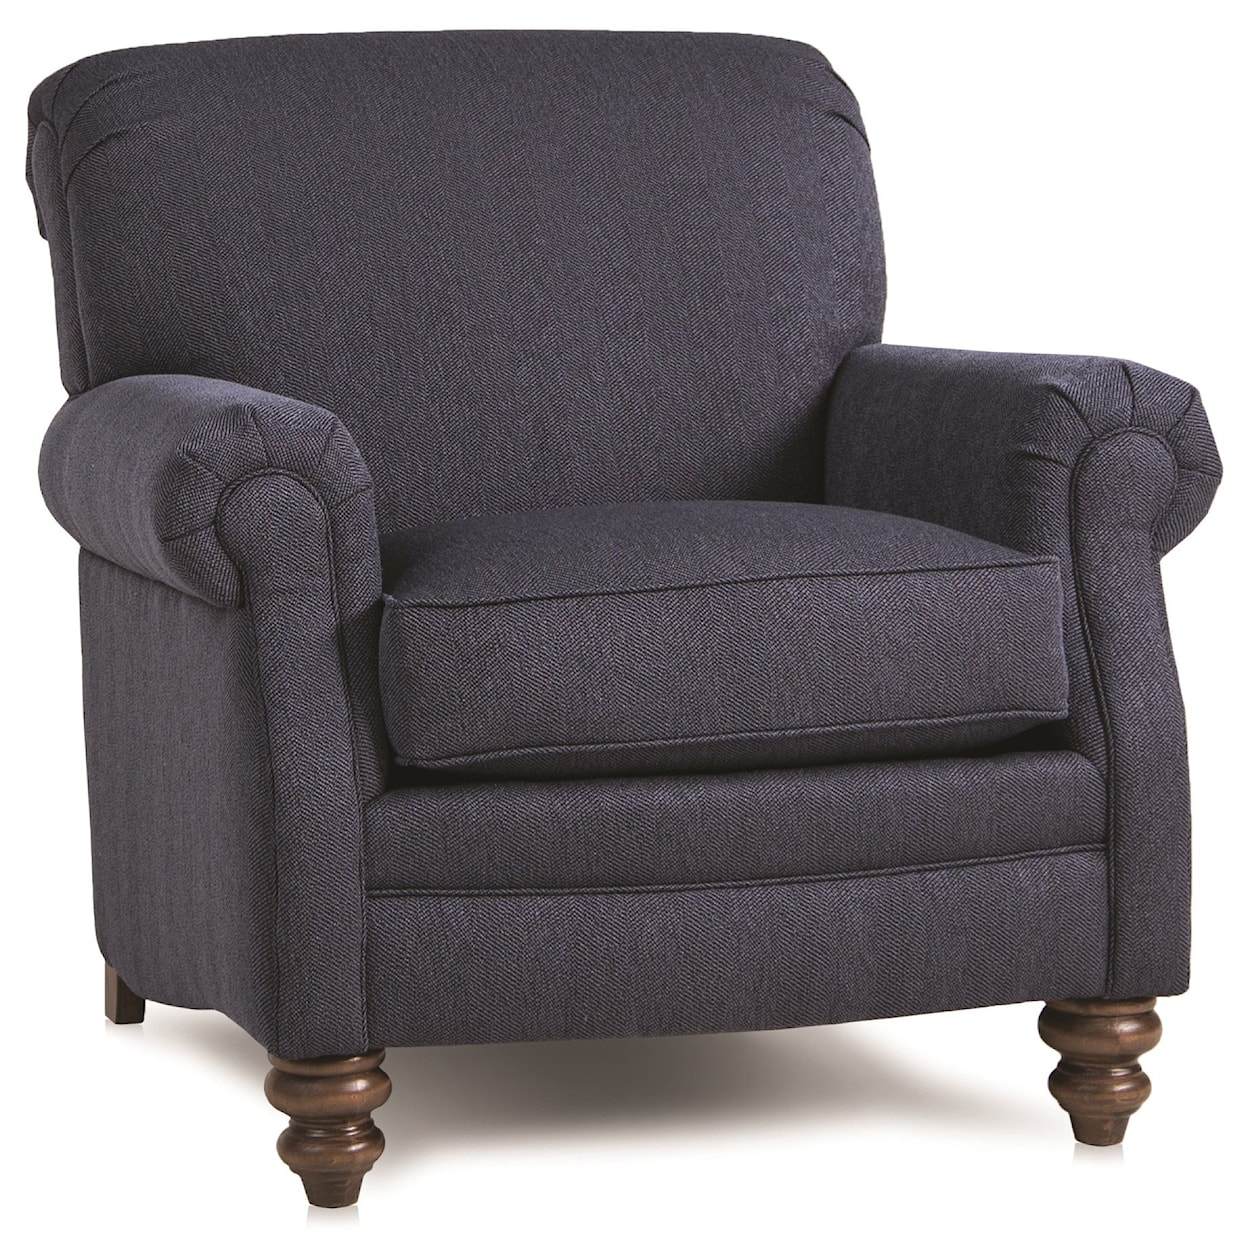 Smith Brothers 383 Accent Chair